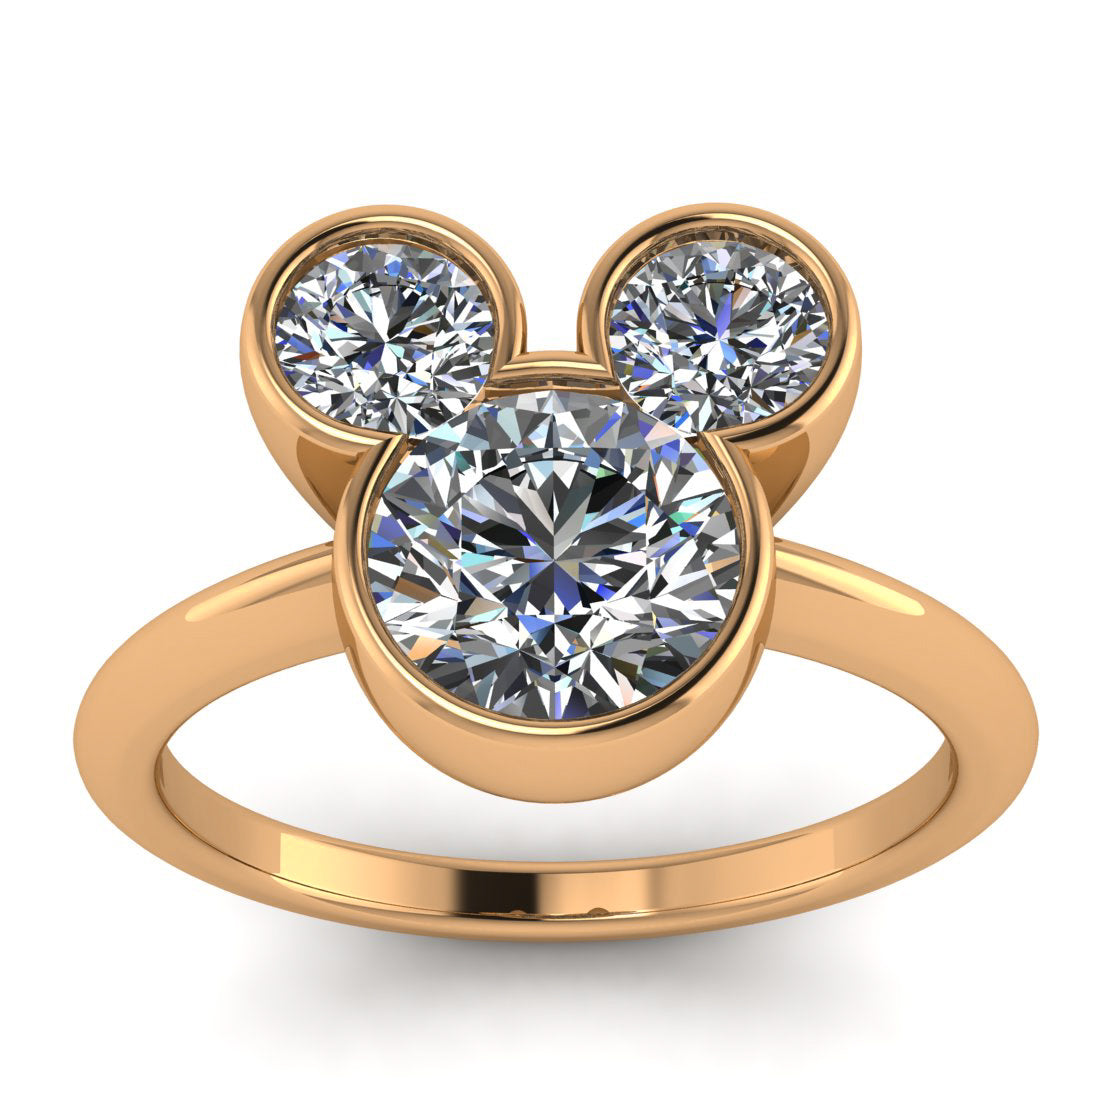 Mouse Ears Magically Inspired Engagement Ring - Mouse Ears Magic Solitaire